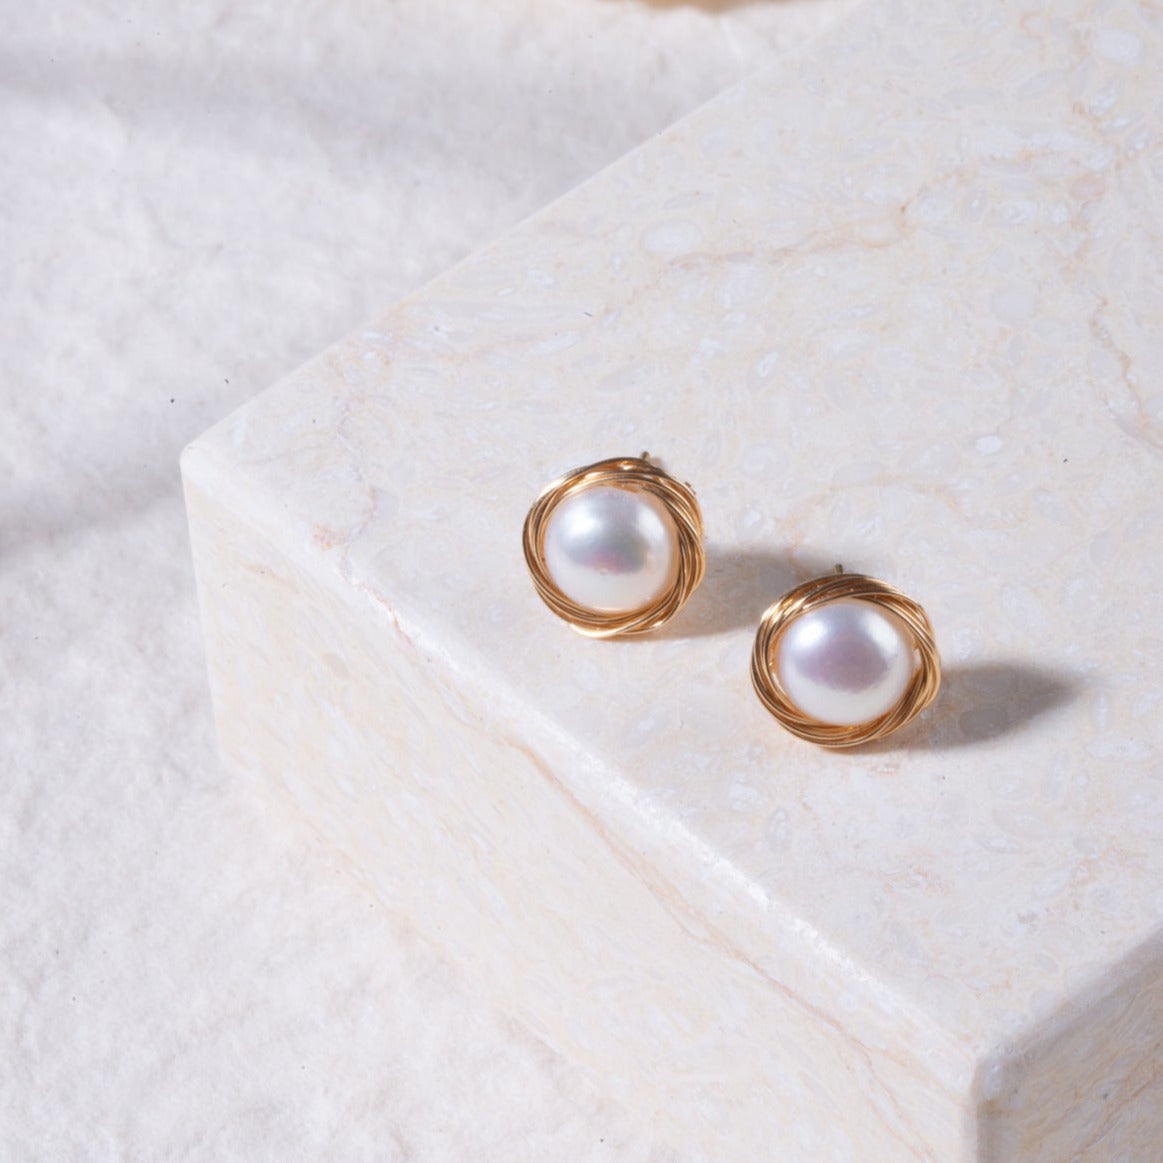 Hand Wire Wrapping Strong Luster Pearl Stud Earrings